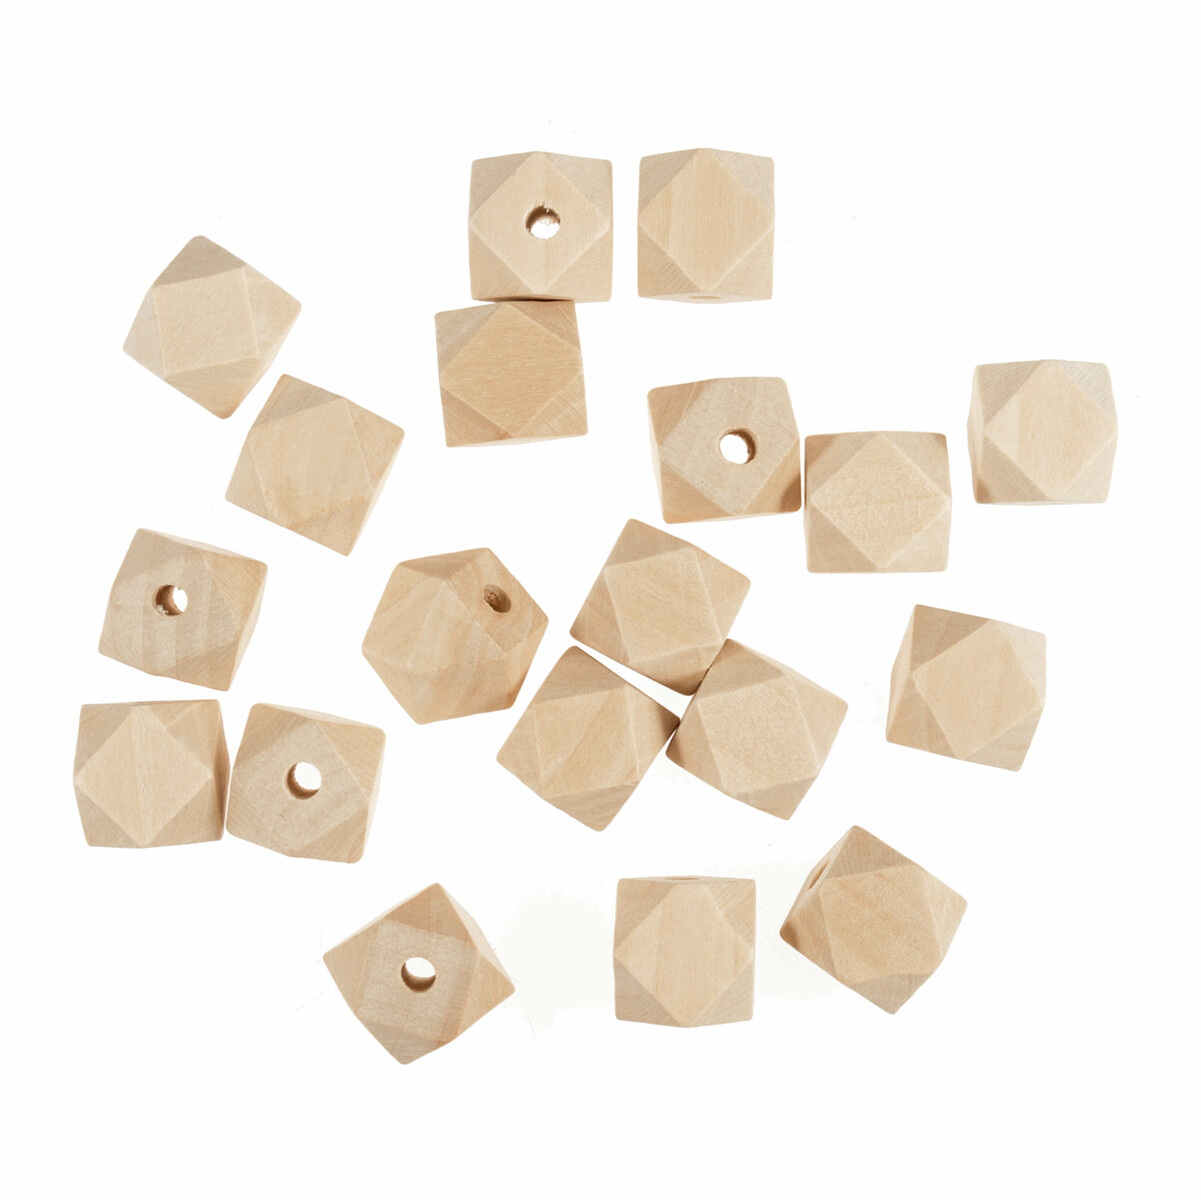 20mm Geo Cut Wooden Beads - Pack of 5